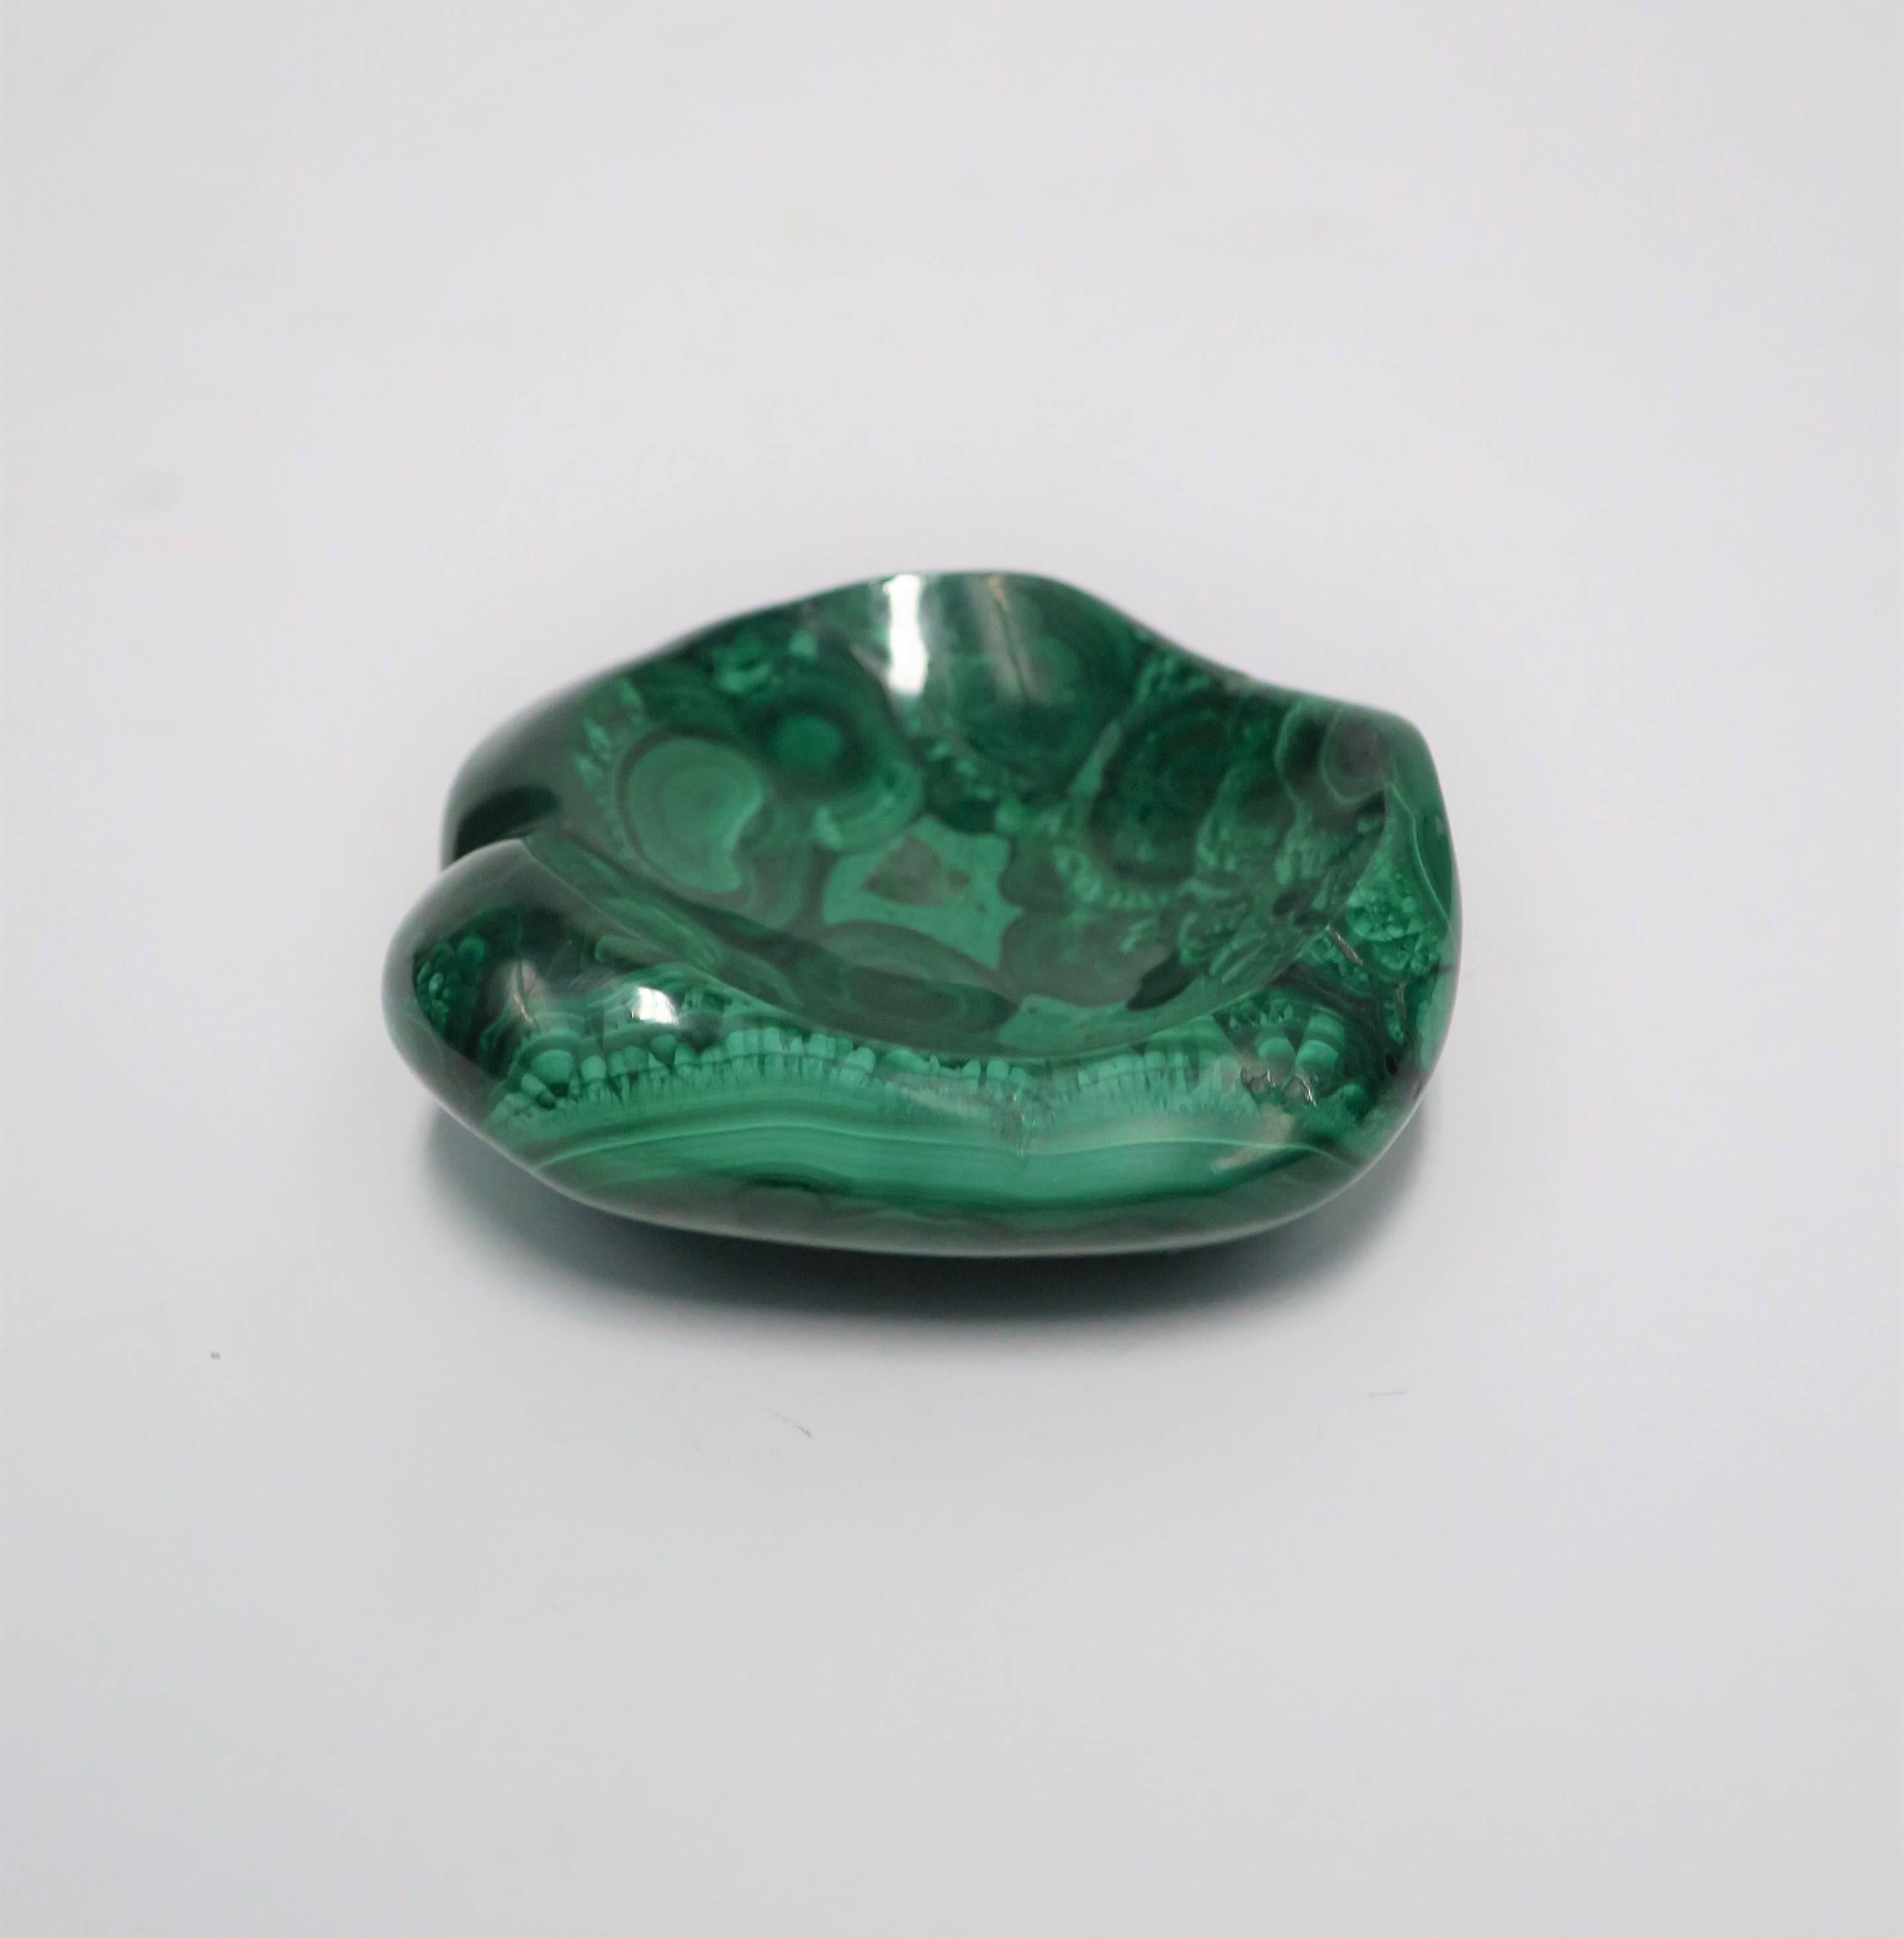 A small emerald green malachite bowl, trinket or jewelry dish; piece can be used on a desk, vanity, or other area to hold small items. A beautiful malachite vessel, polished smooth. 

Piece measures approximately: 3.25 in. D x 1.25 in. H 

Item